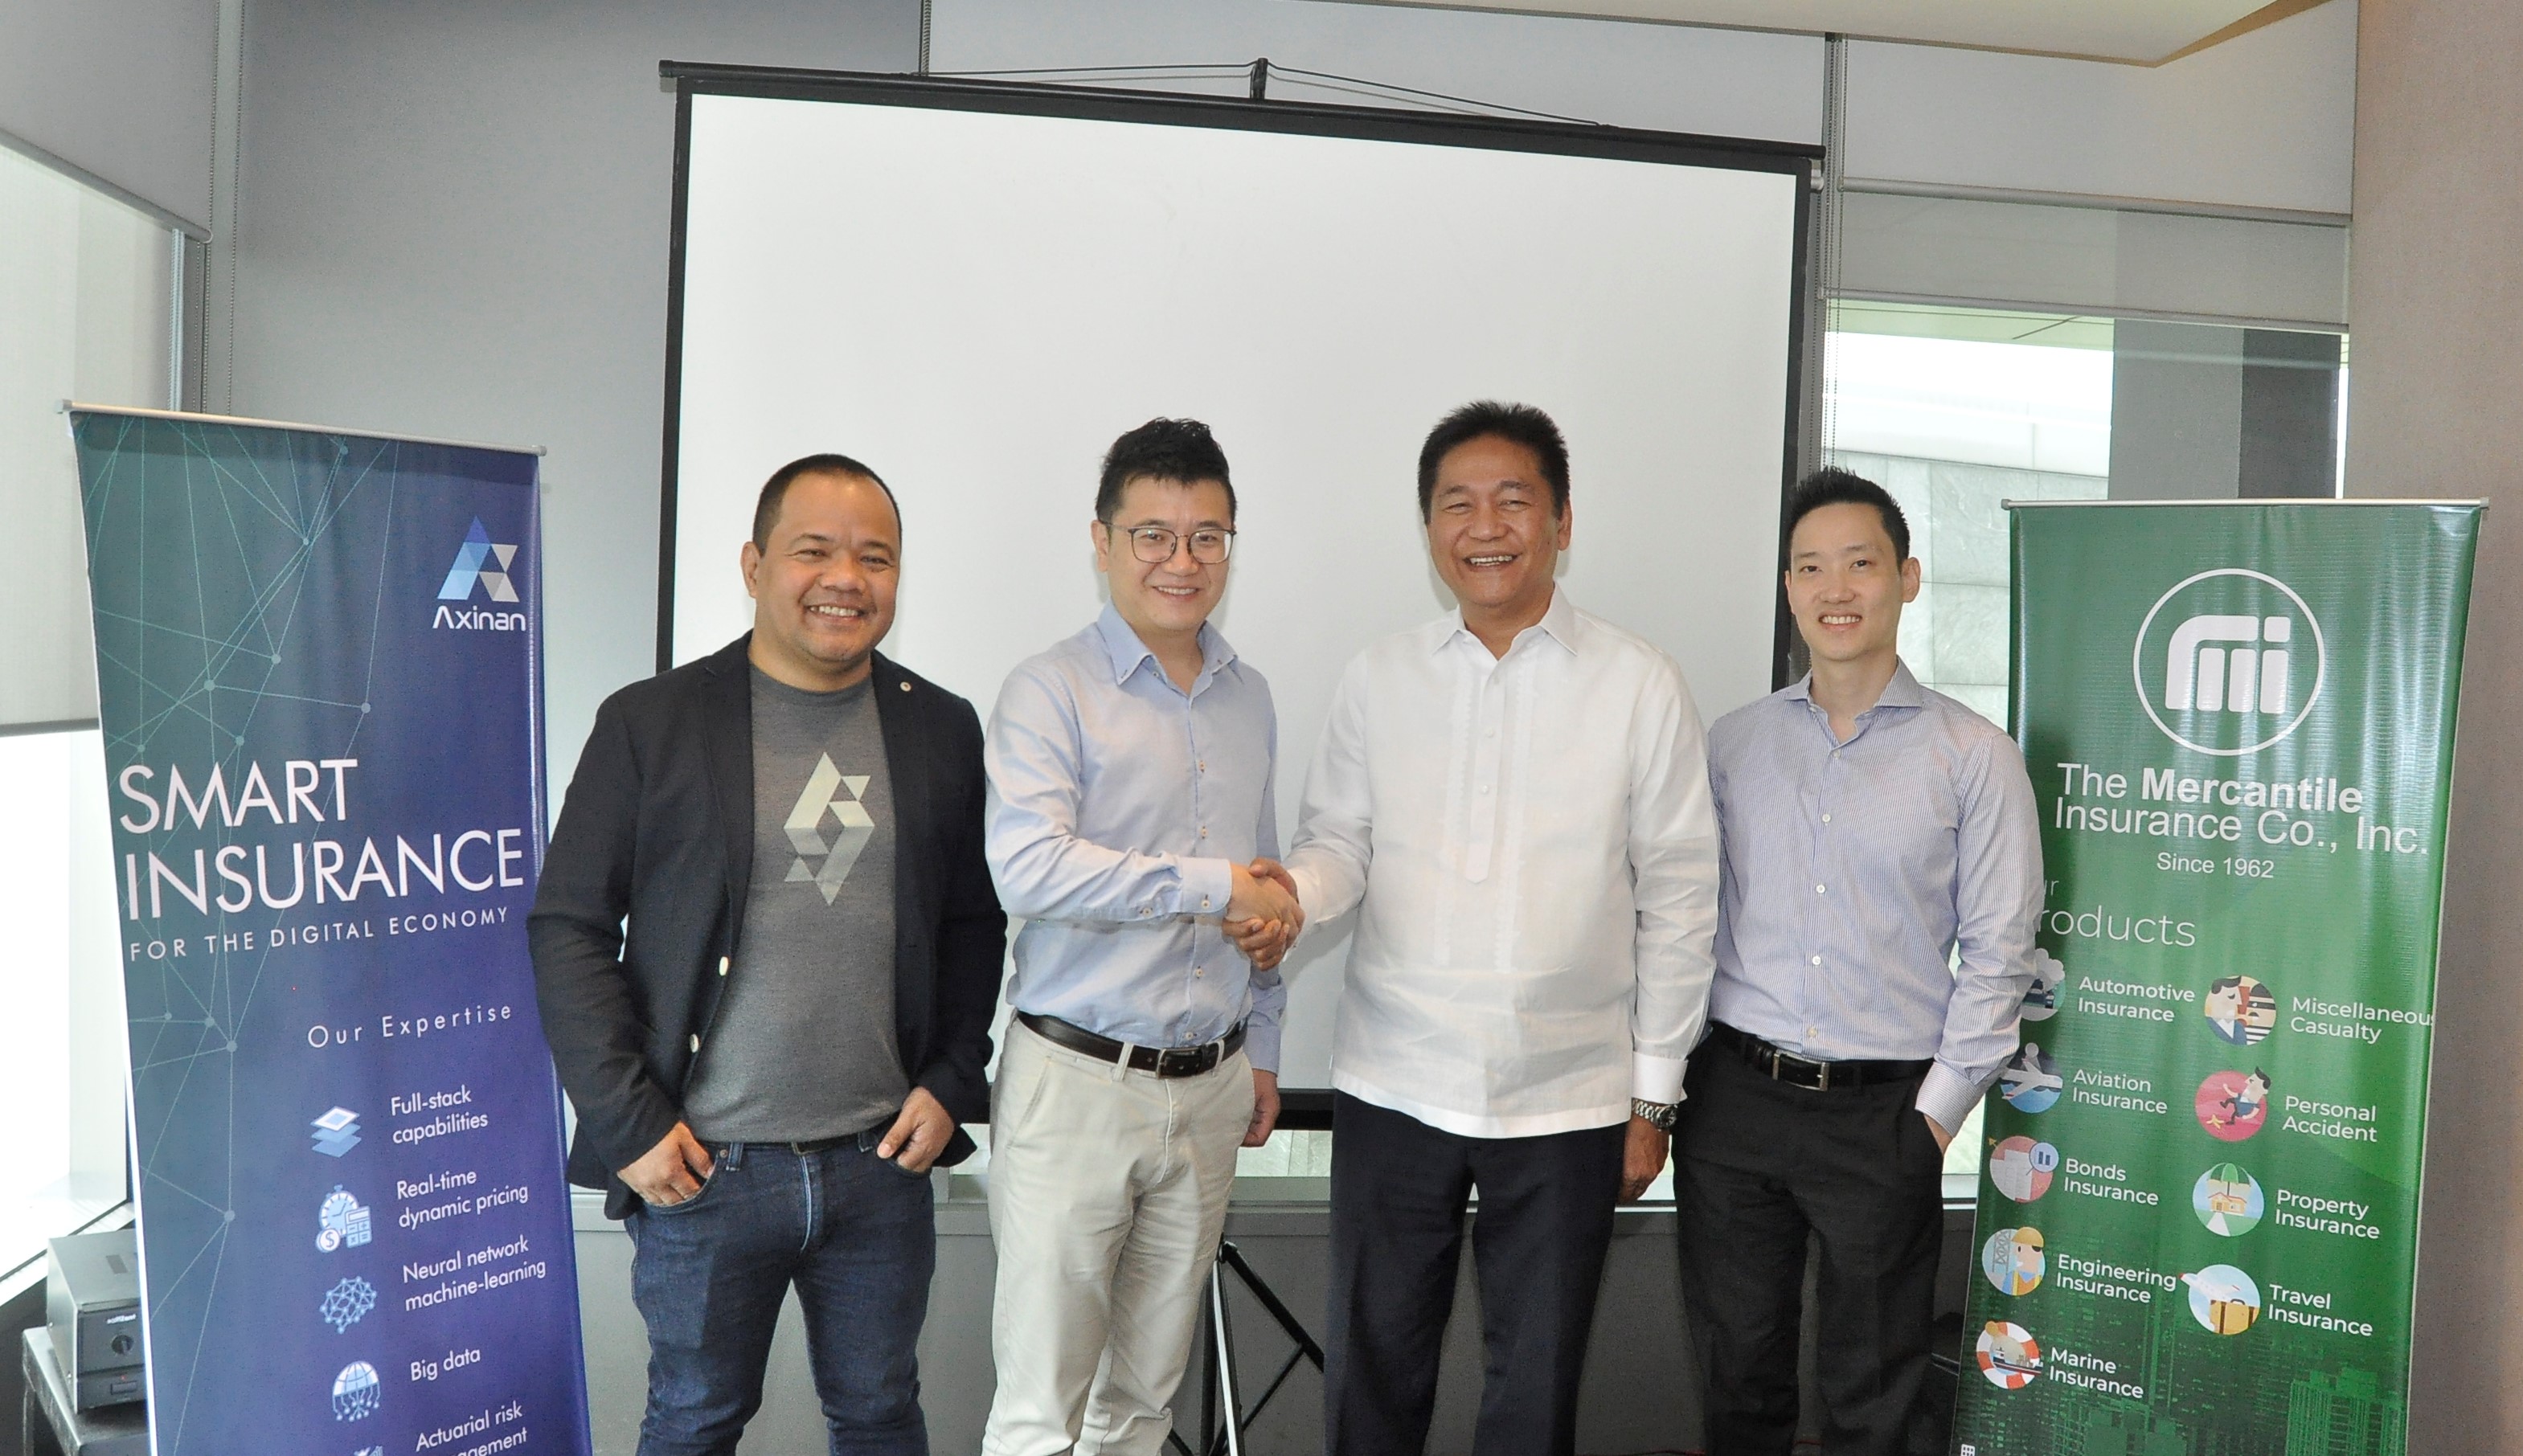 Singapore’s insurtech Axinan expands its reach to the Philippines